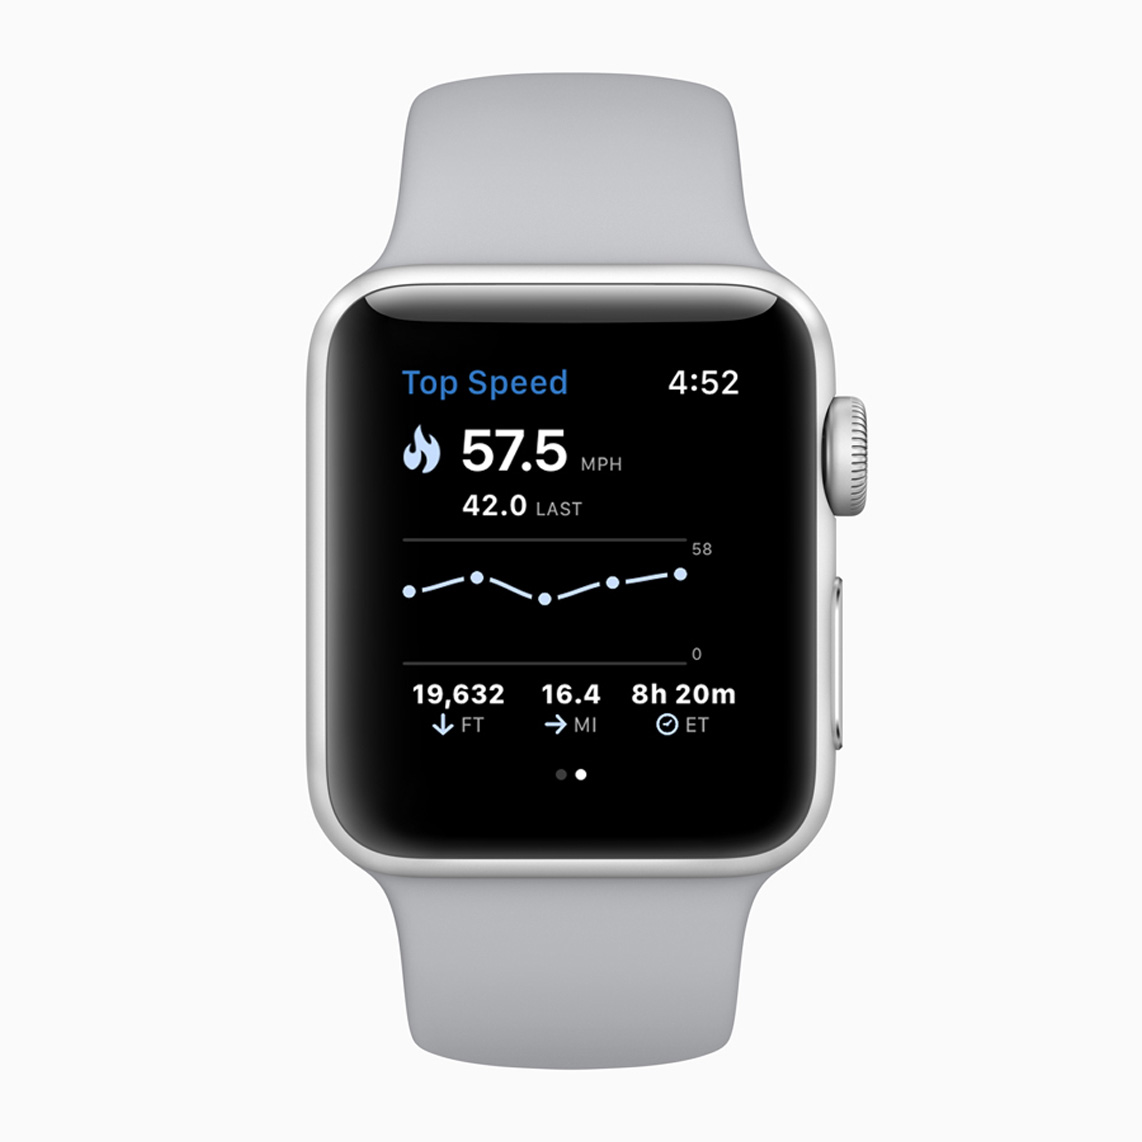 You Can Now Track Skiing and Snowboarding Activity With the Apple Watch Series 3